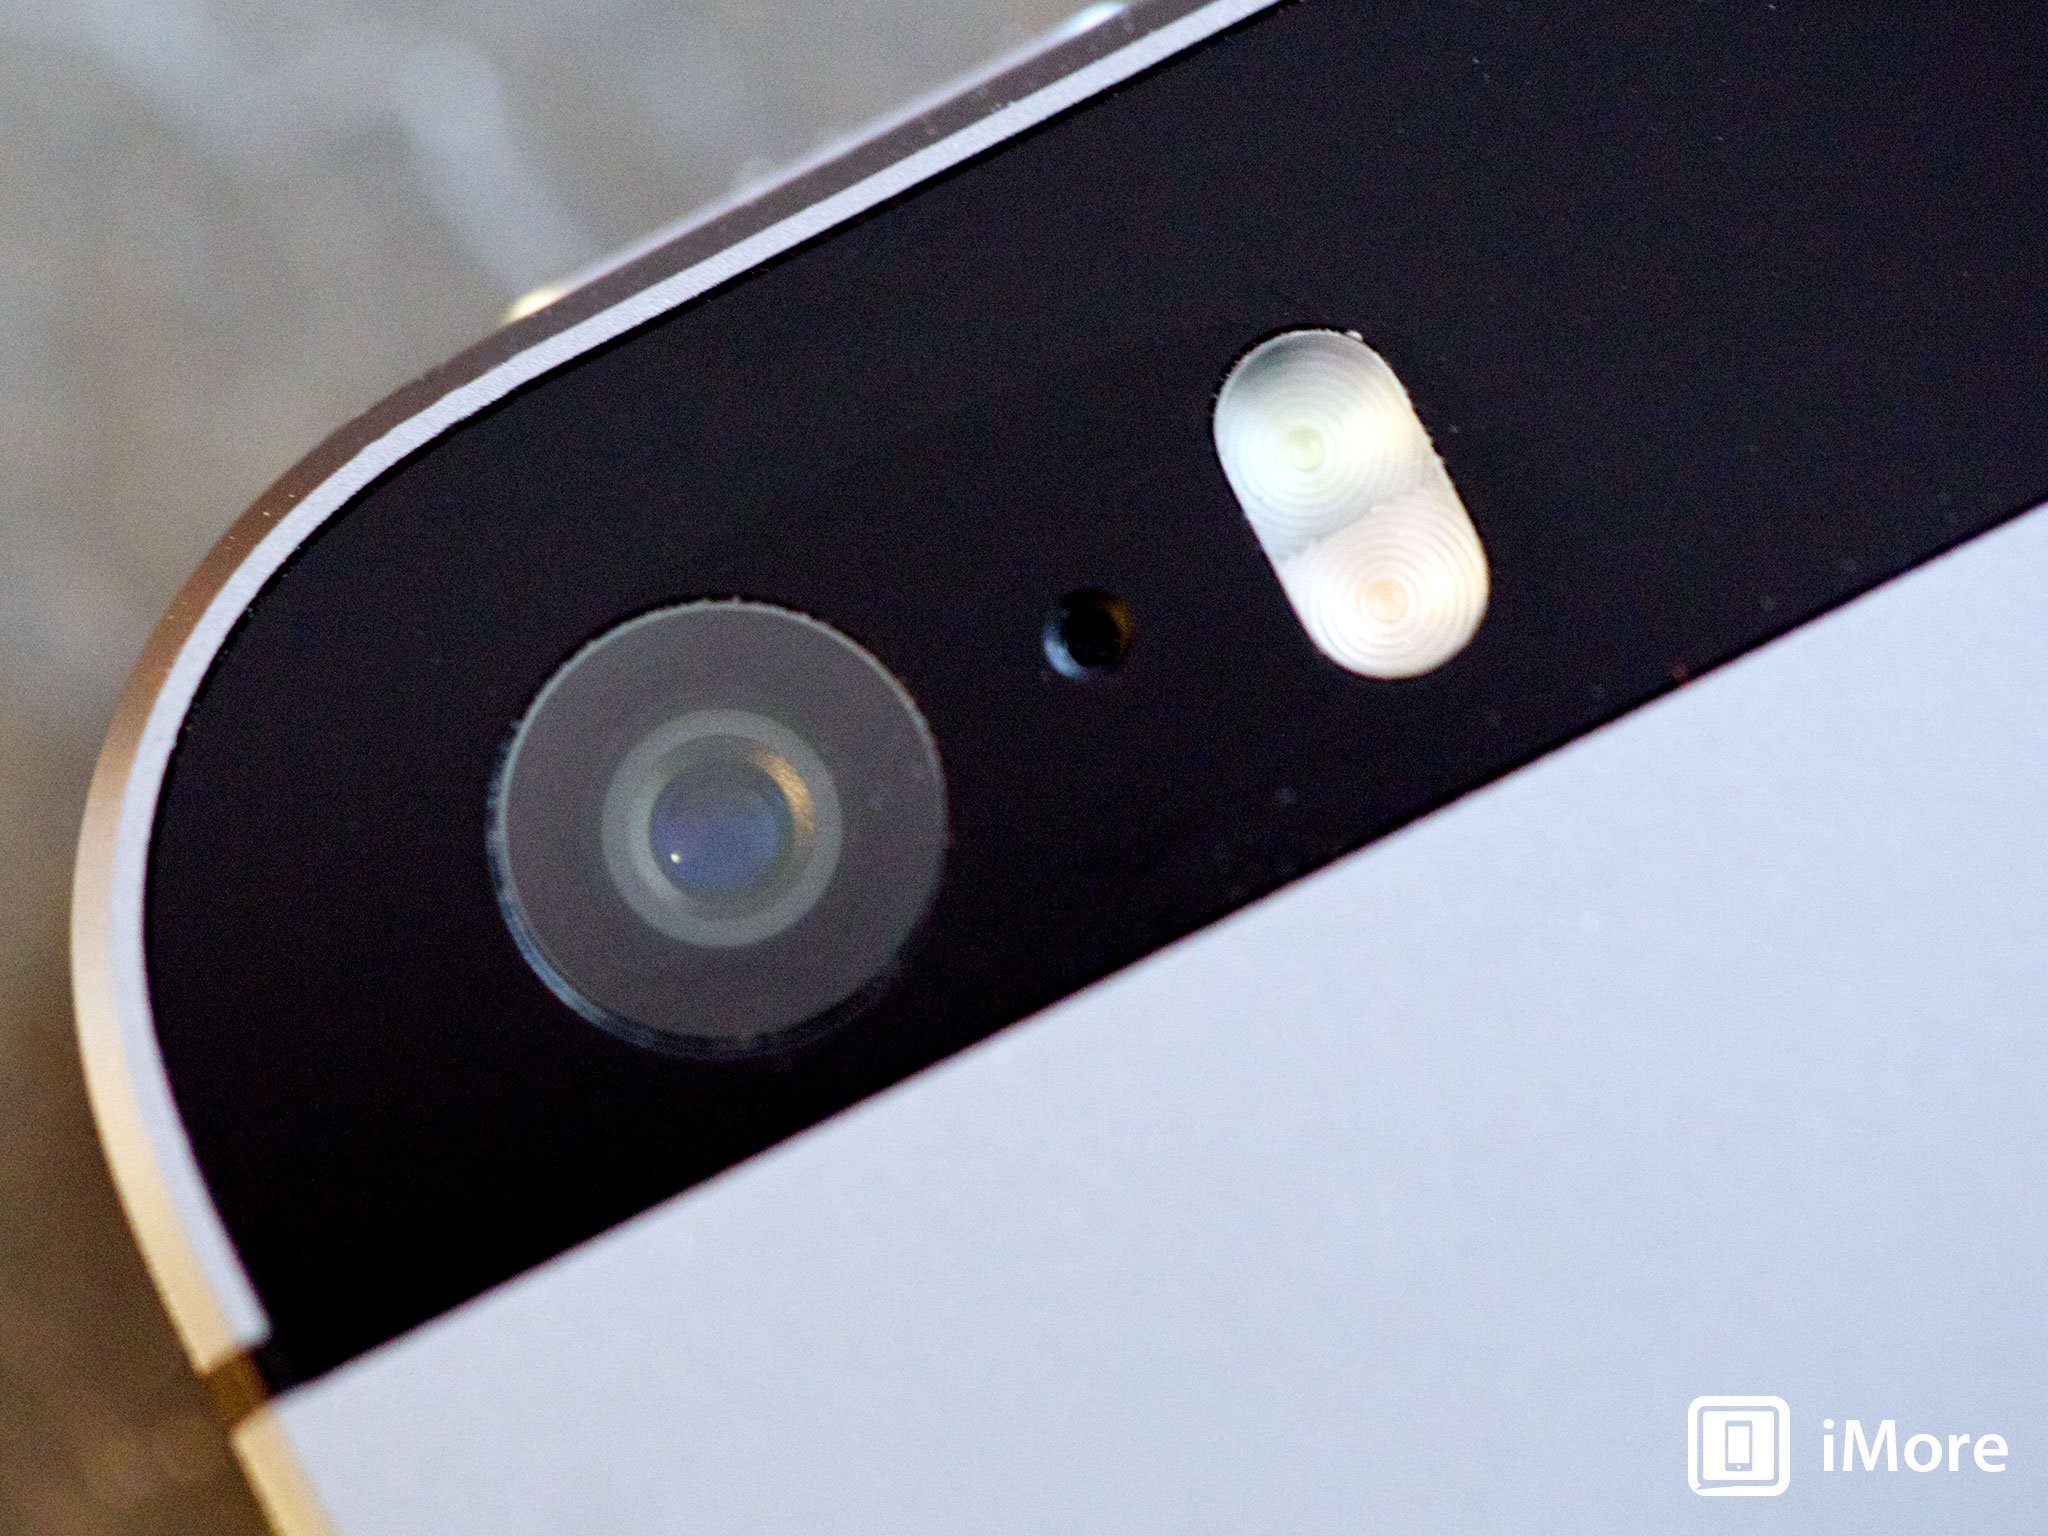 Should Apple improve the iPhone 6 camera by going to the glass... or the cloud?